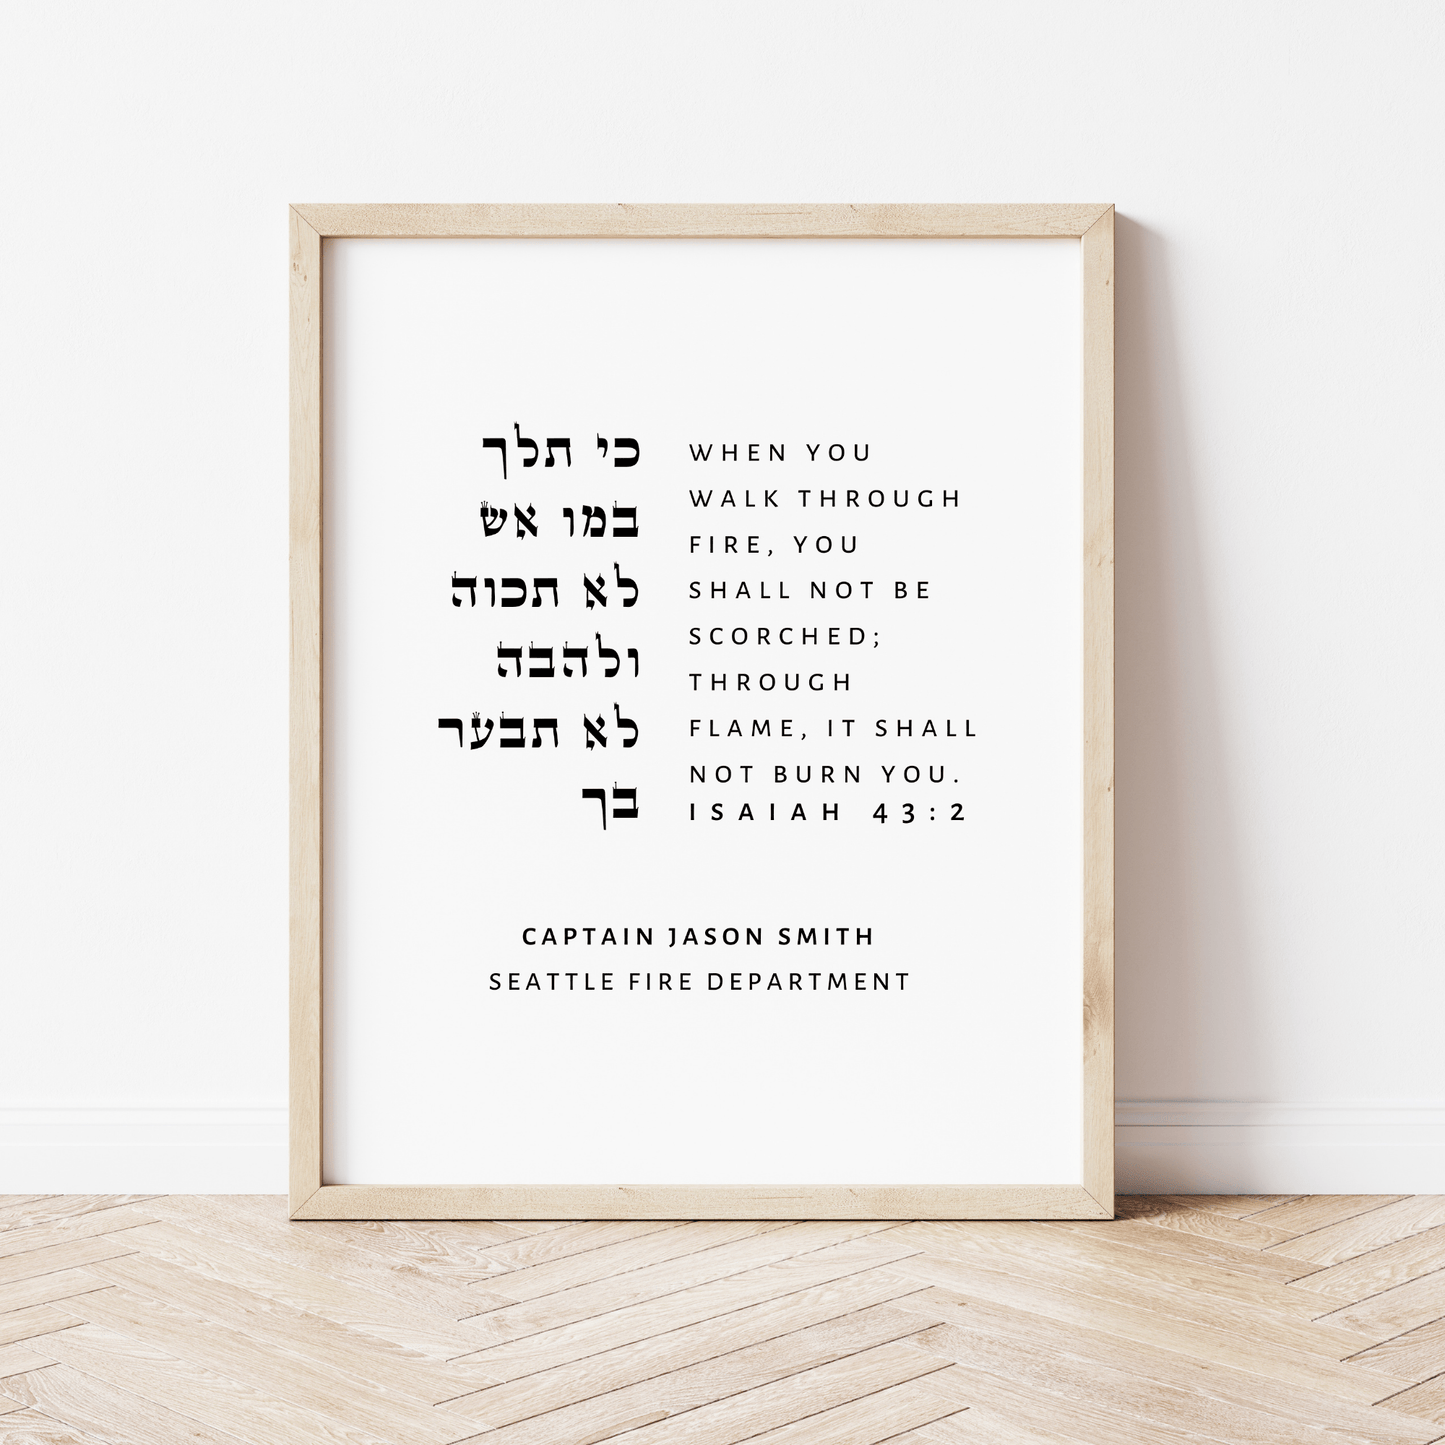 Gelato Isaiah 43:2 | Gift for Firefighter Husband/Boyfriend | Personalized Gift for Him | Firefighter Graduation Isaiah 43:2 Gift for Firefighter Husband/Boyfriend Firefighter Graduation